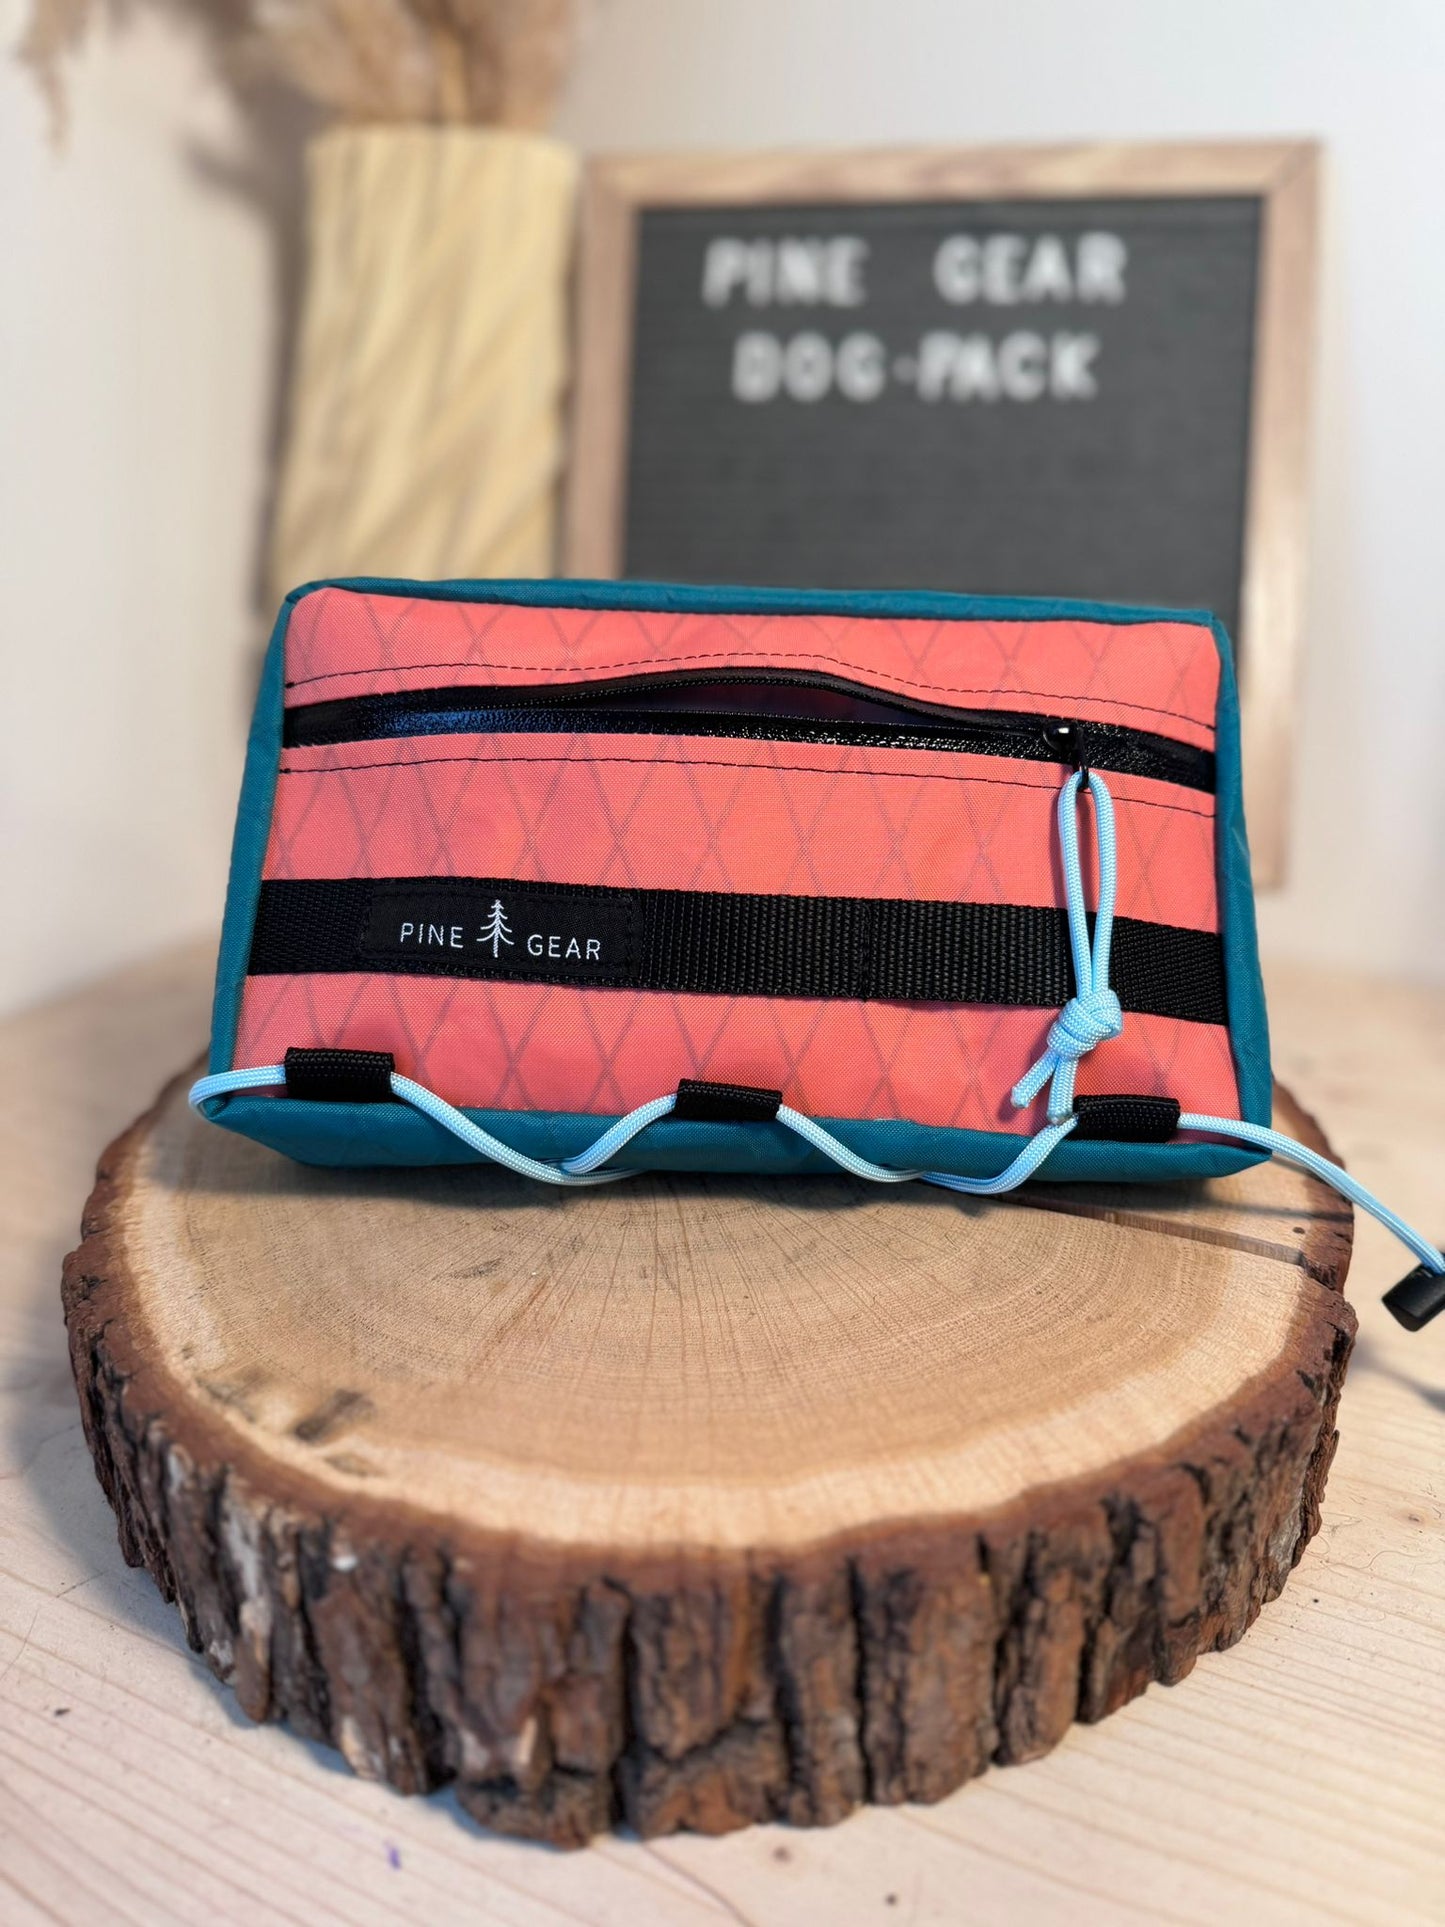 PINE GEAR - Dogpack coral/blue